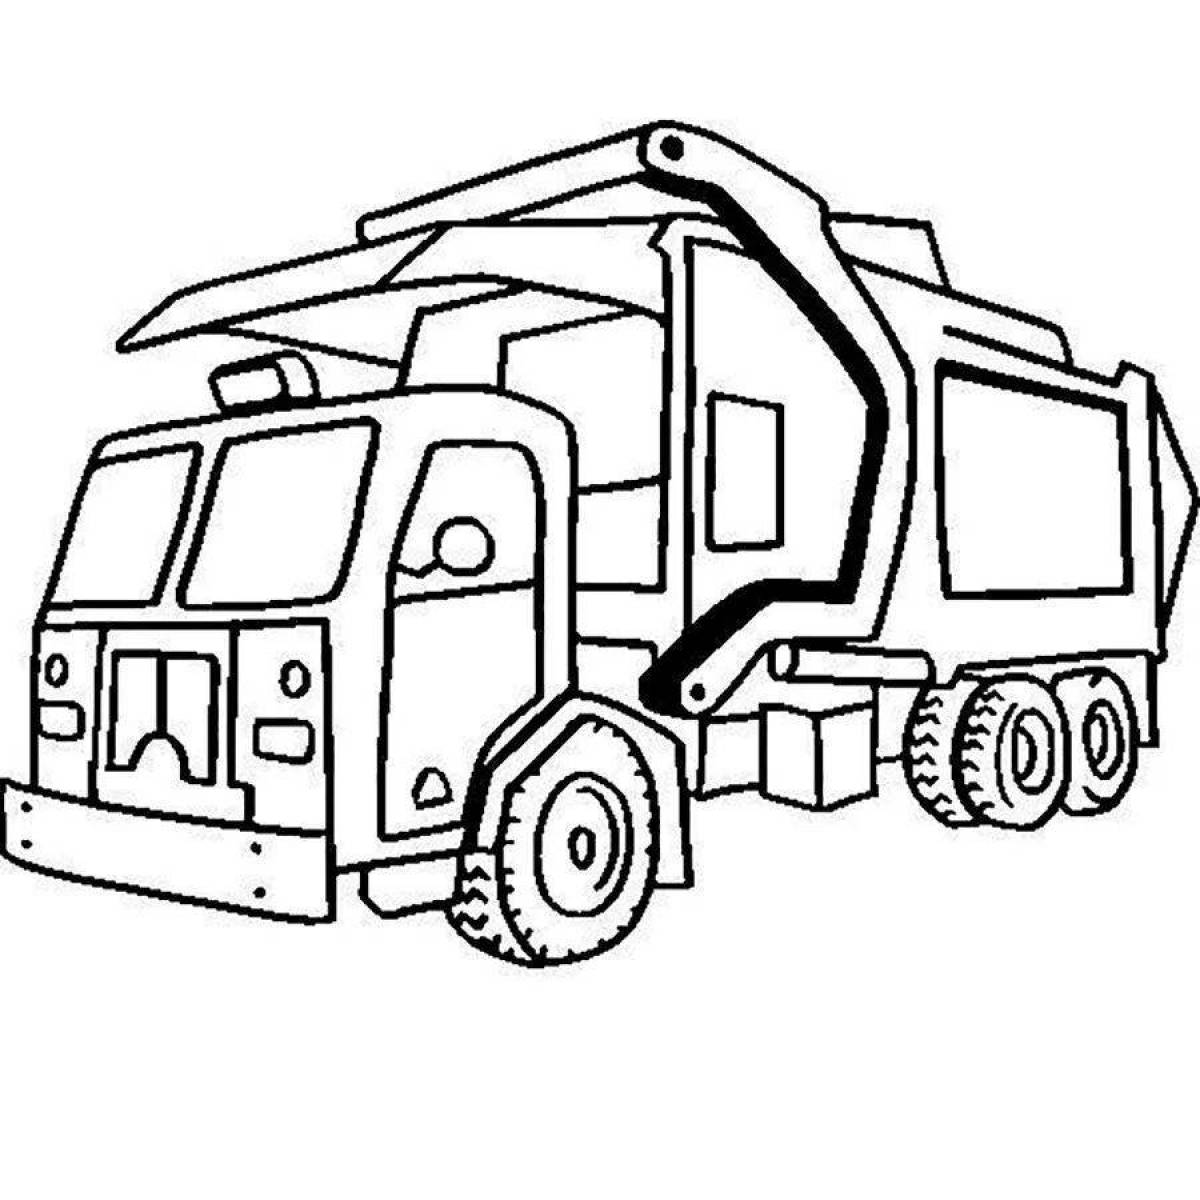 Fabulous garbage truck coloring book for children 4-5 years old